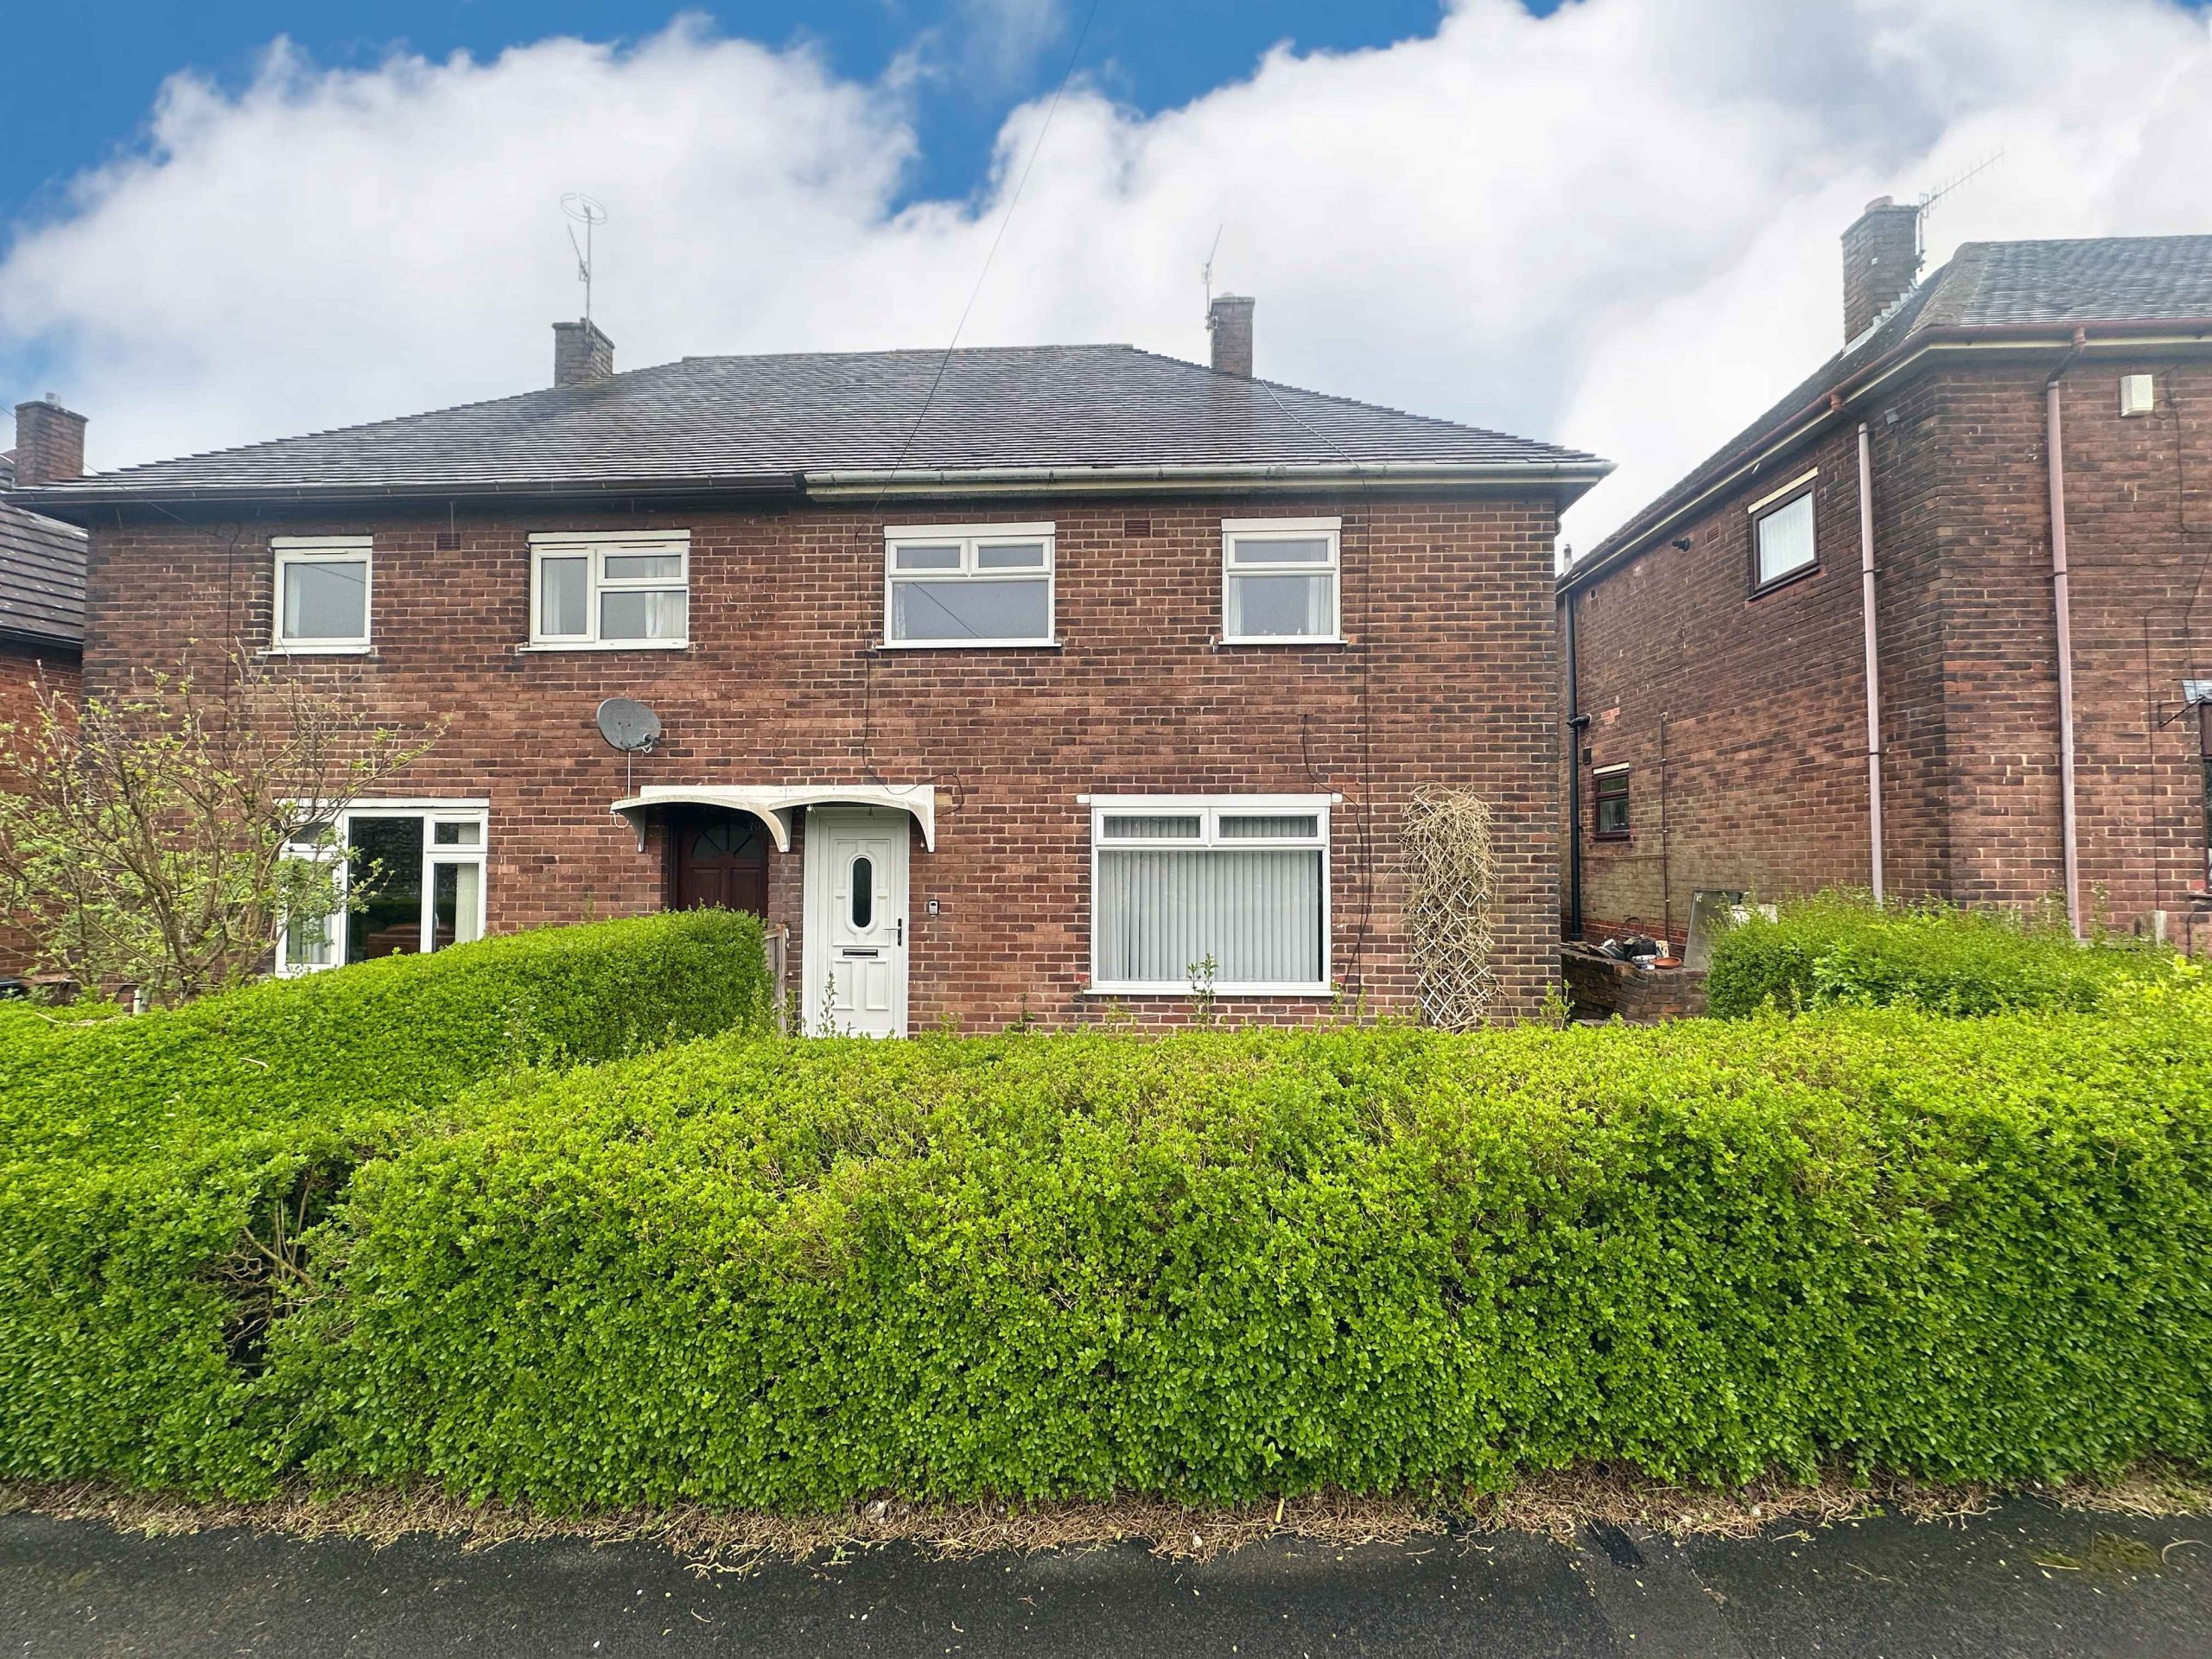 Stoke-on-Trent homes for sale offering exceptional value in Bond Wolfe’s next auction